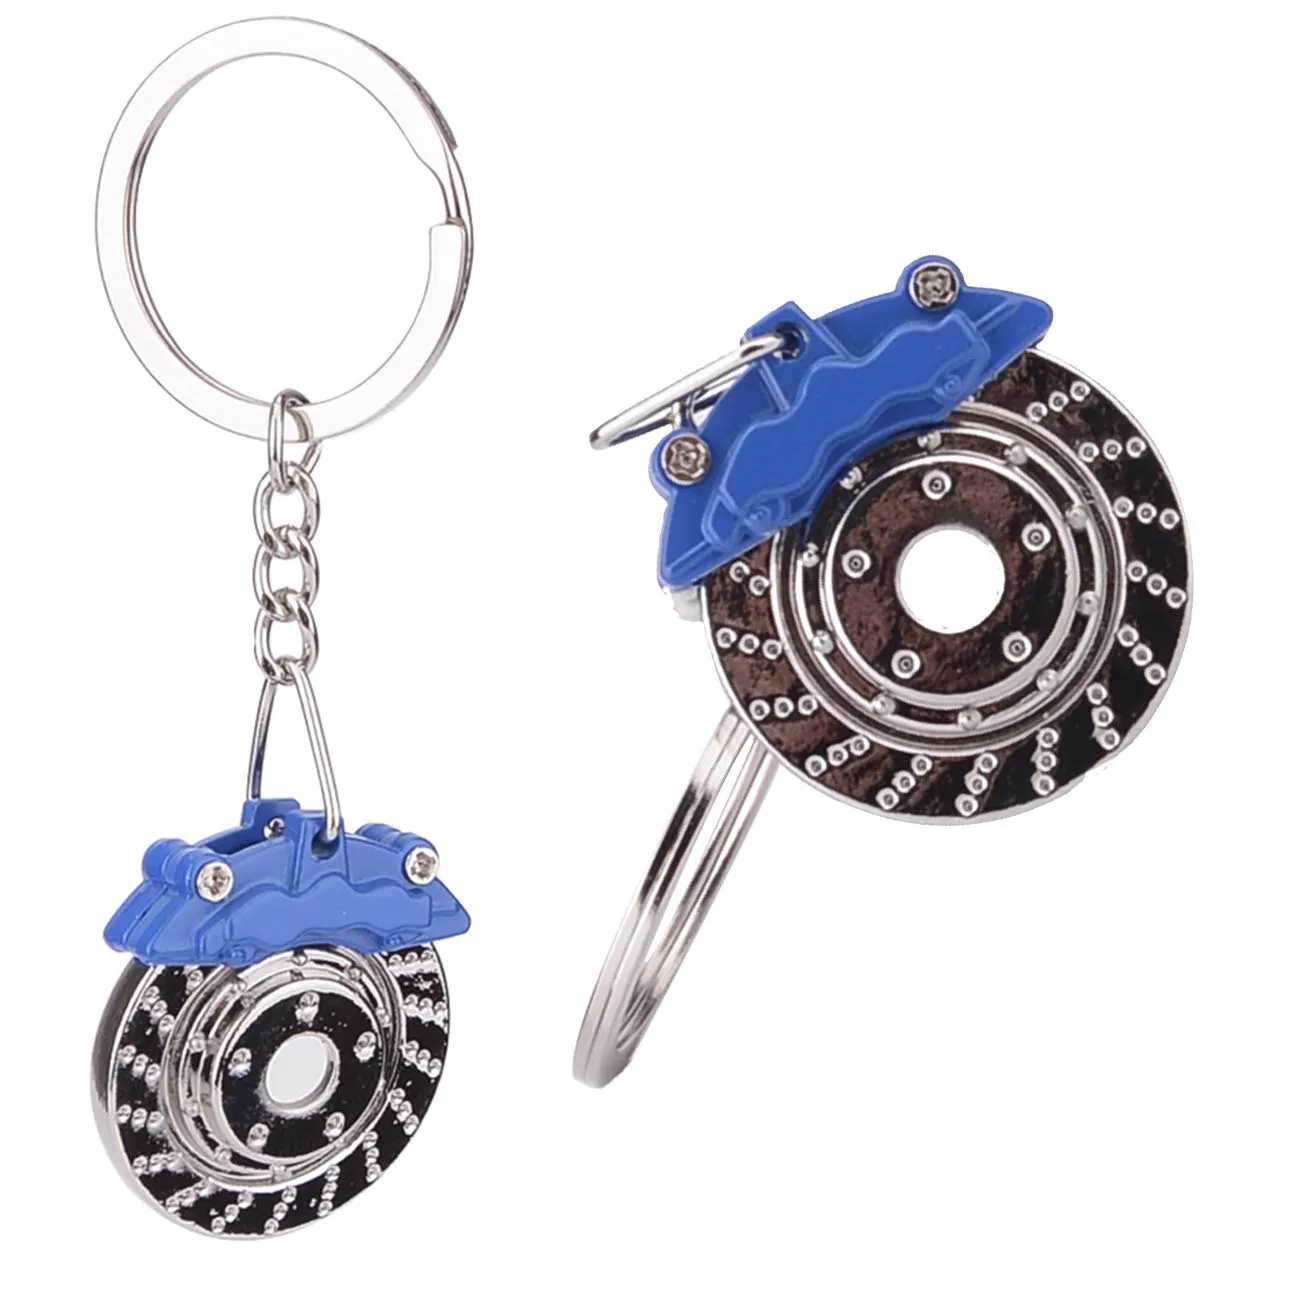 3ml car parts model key chains colorful turbo keychain black manual gearbox keychain colorful tire rim keychain blue brake rotor keychain red spring shockabsorber keychain